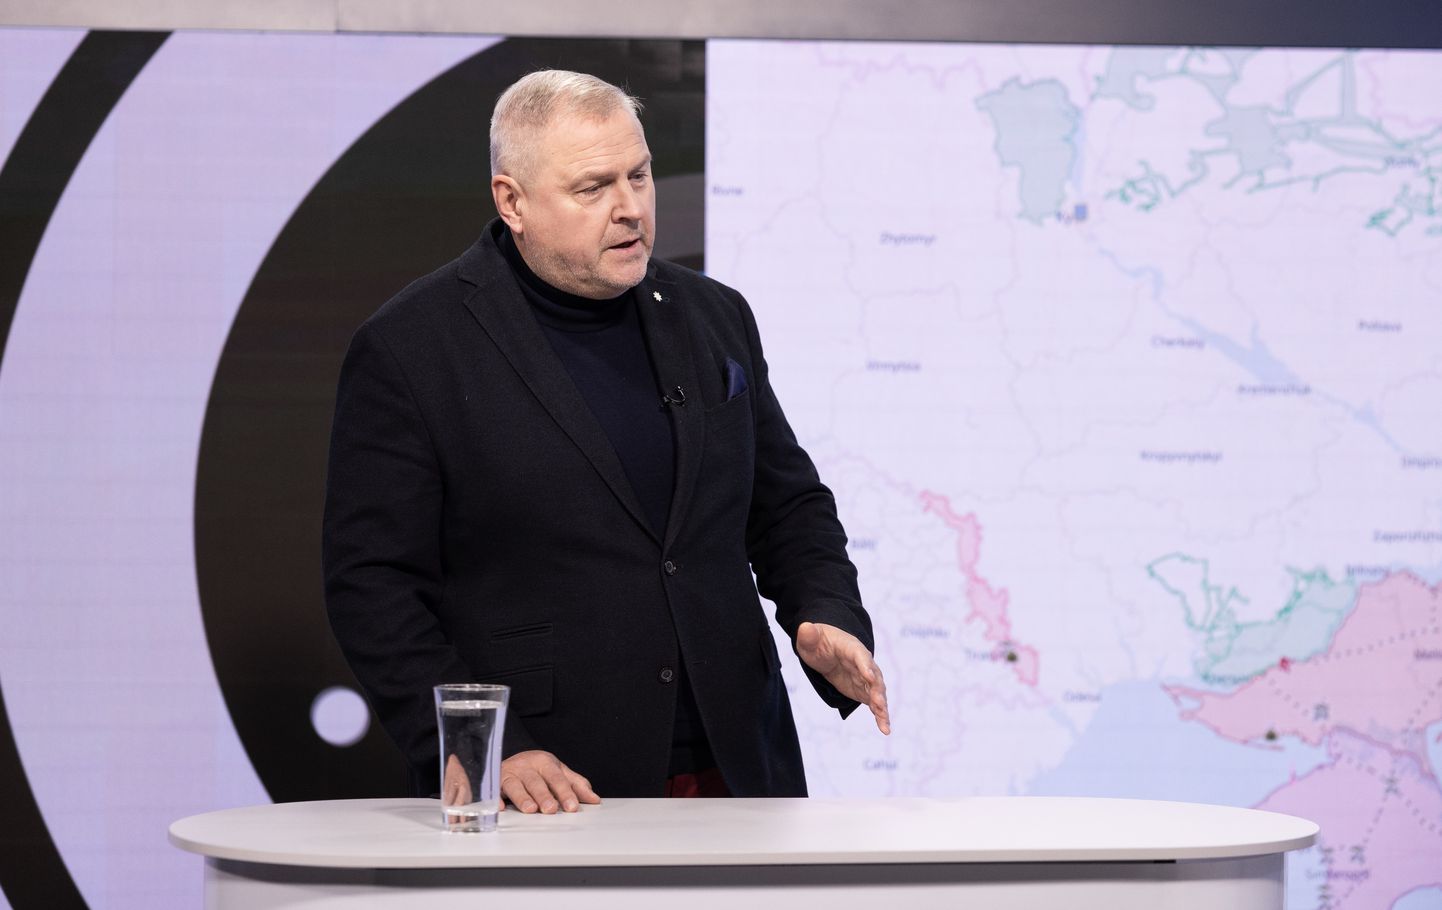 Estonian MEP and former defense chief Riho Terras said that sending of Western troops to Ukraine does not seem realistic at the moment.